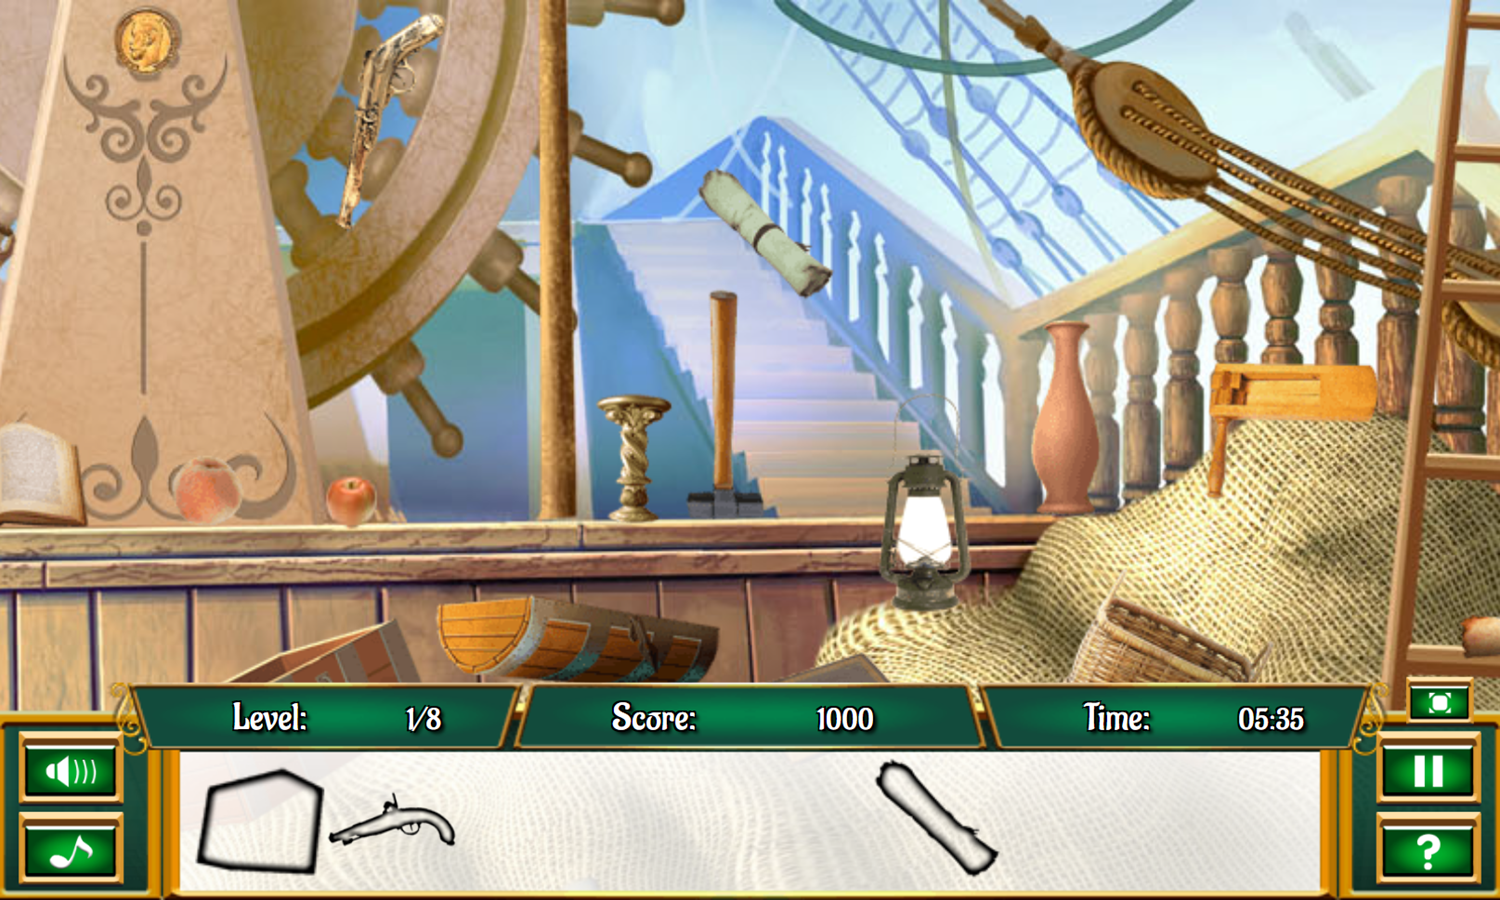 Pirates and Treasures Game Stage 3 Play Screenshot.